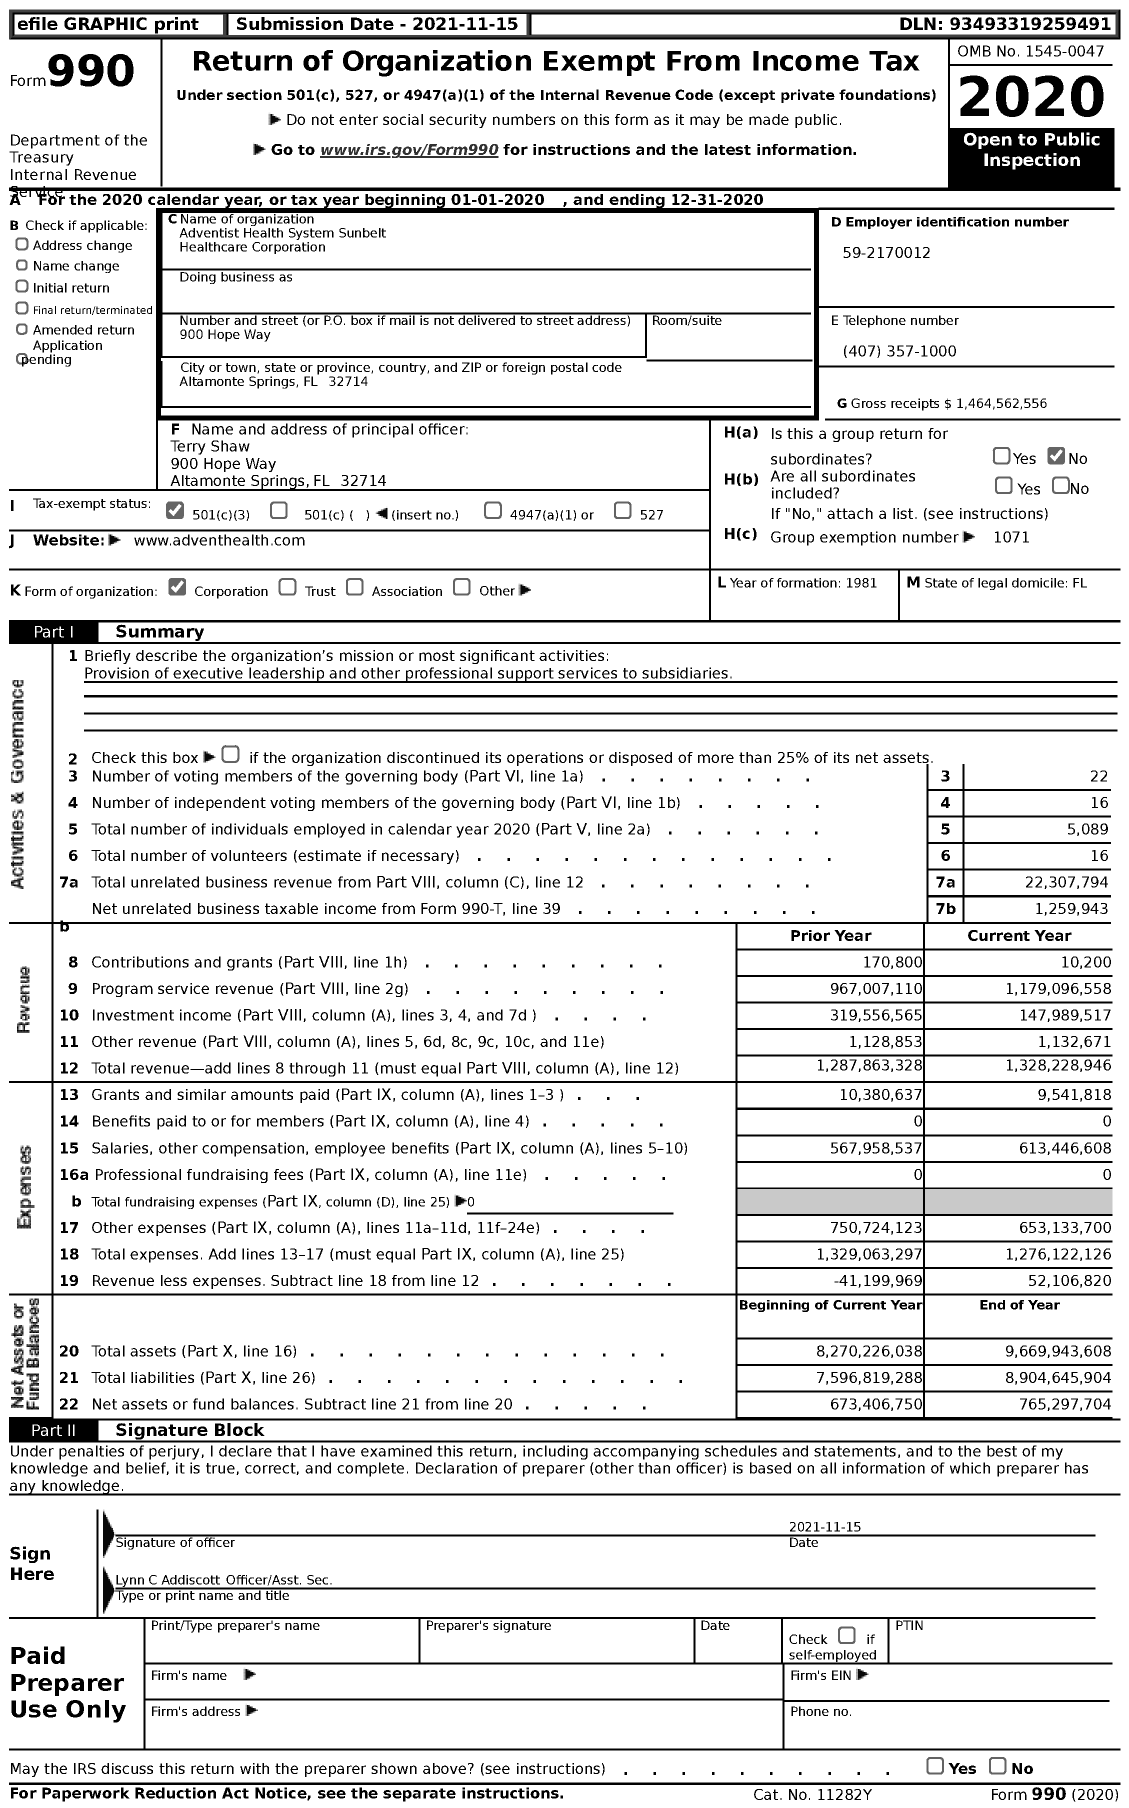 Image of first page of 2020 Form 990 for Adventist Health System Sunbelt Healthcare Corporation